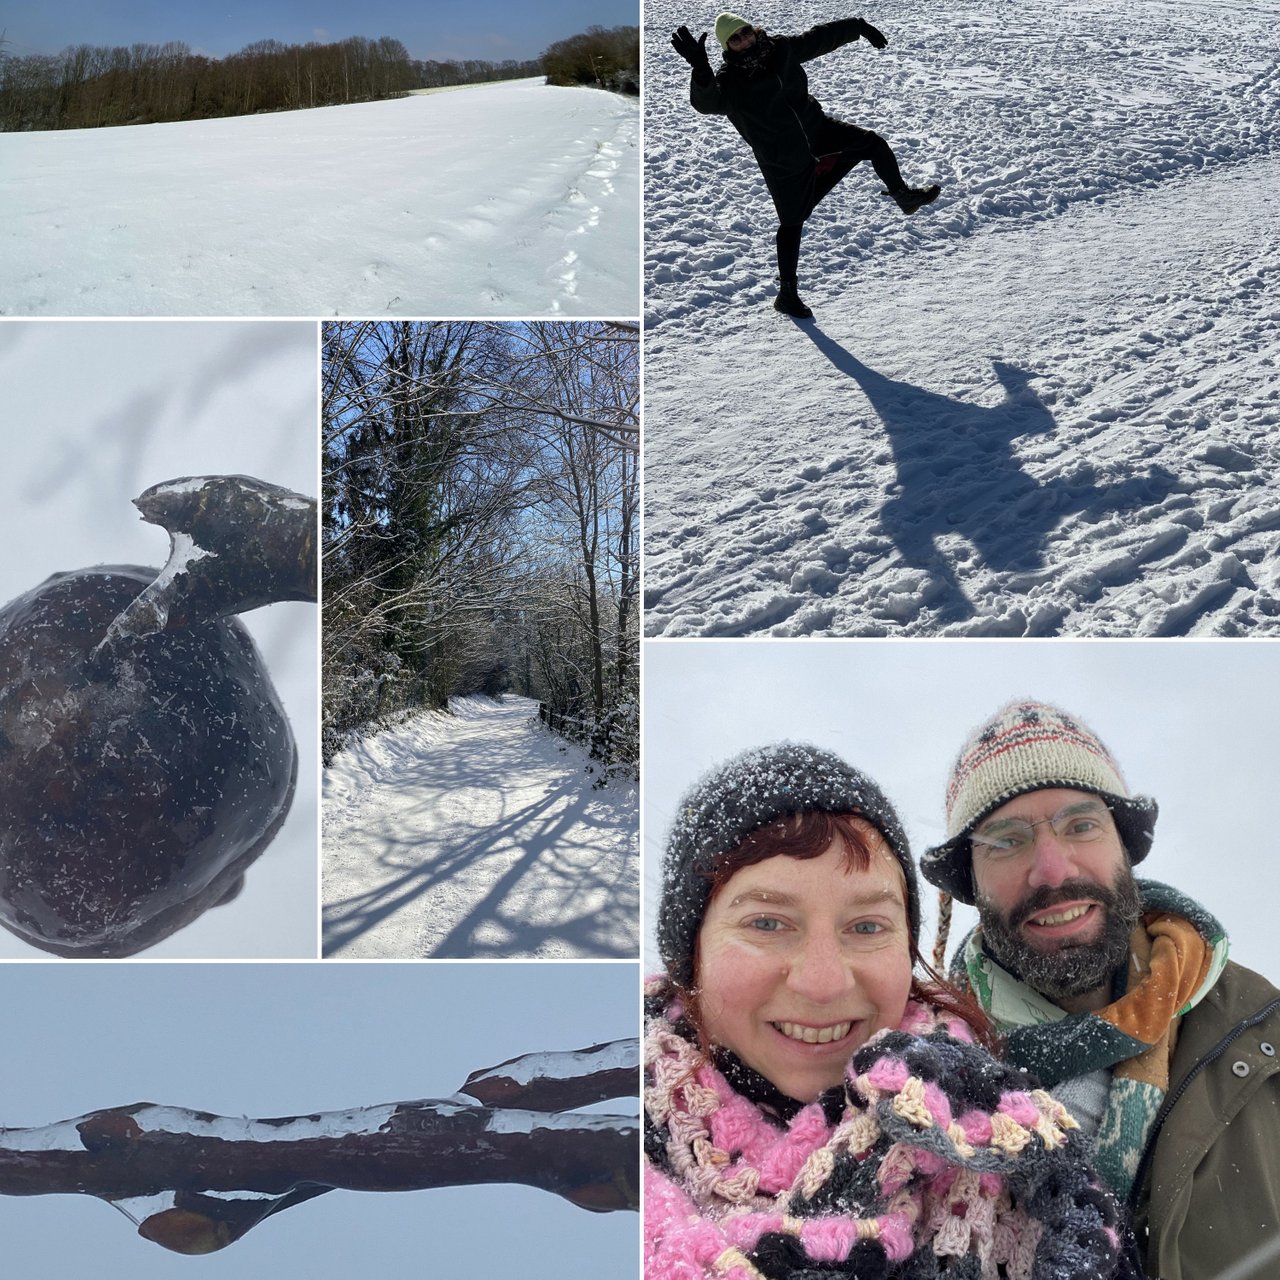 Fotos of a snowy landscape and Simone with her husband in deep snow